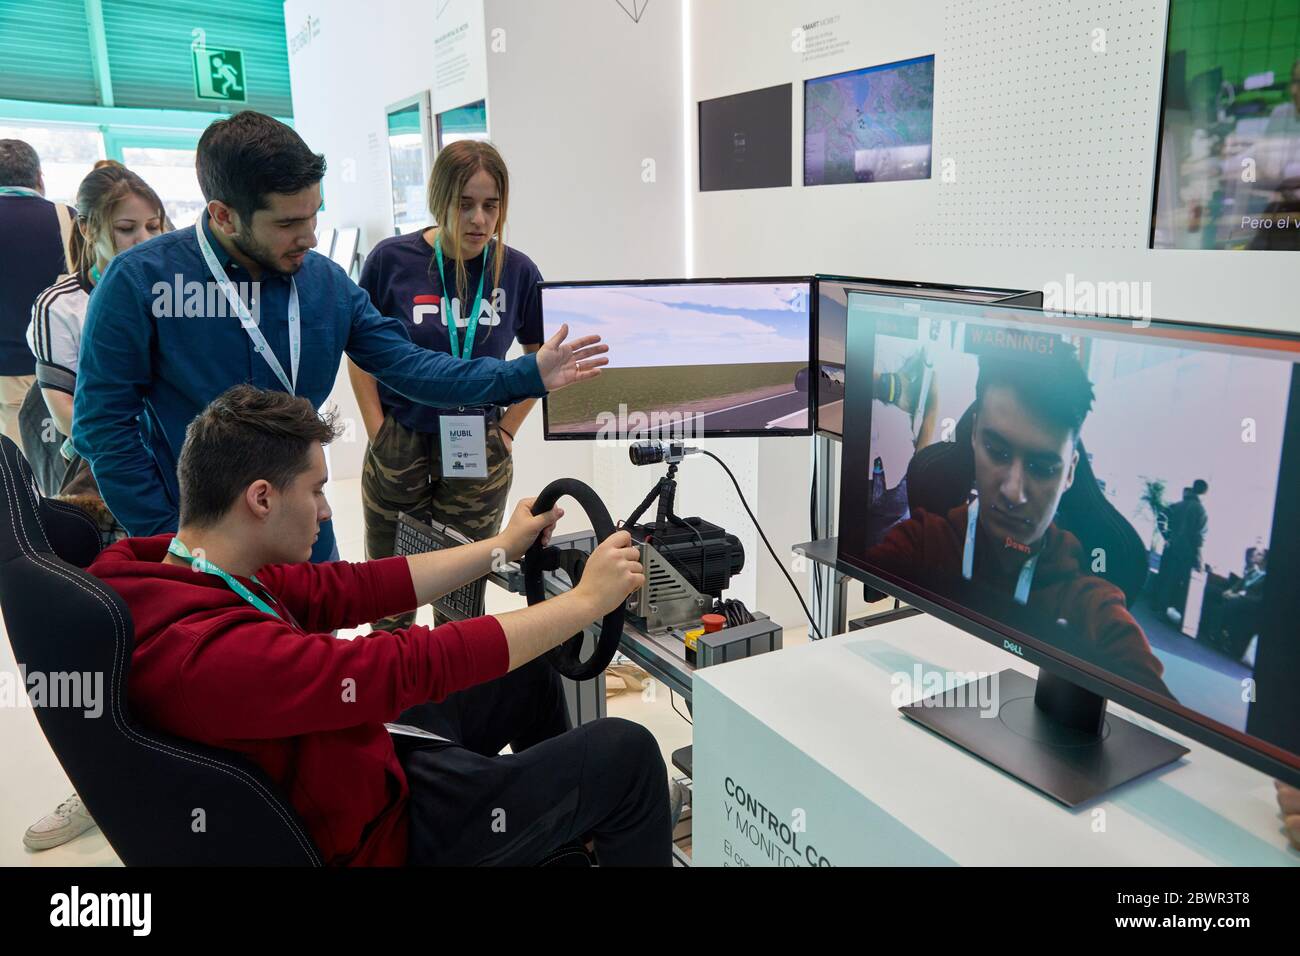 Shared control and monitoring to the driver, Vehicle driving simulator, Go Mobility Exhibition, Professional meeting point of the industrial and Stock Photo